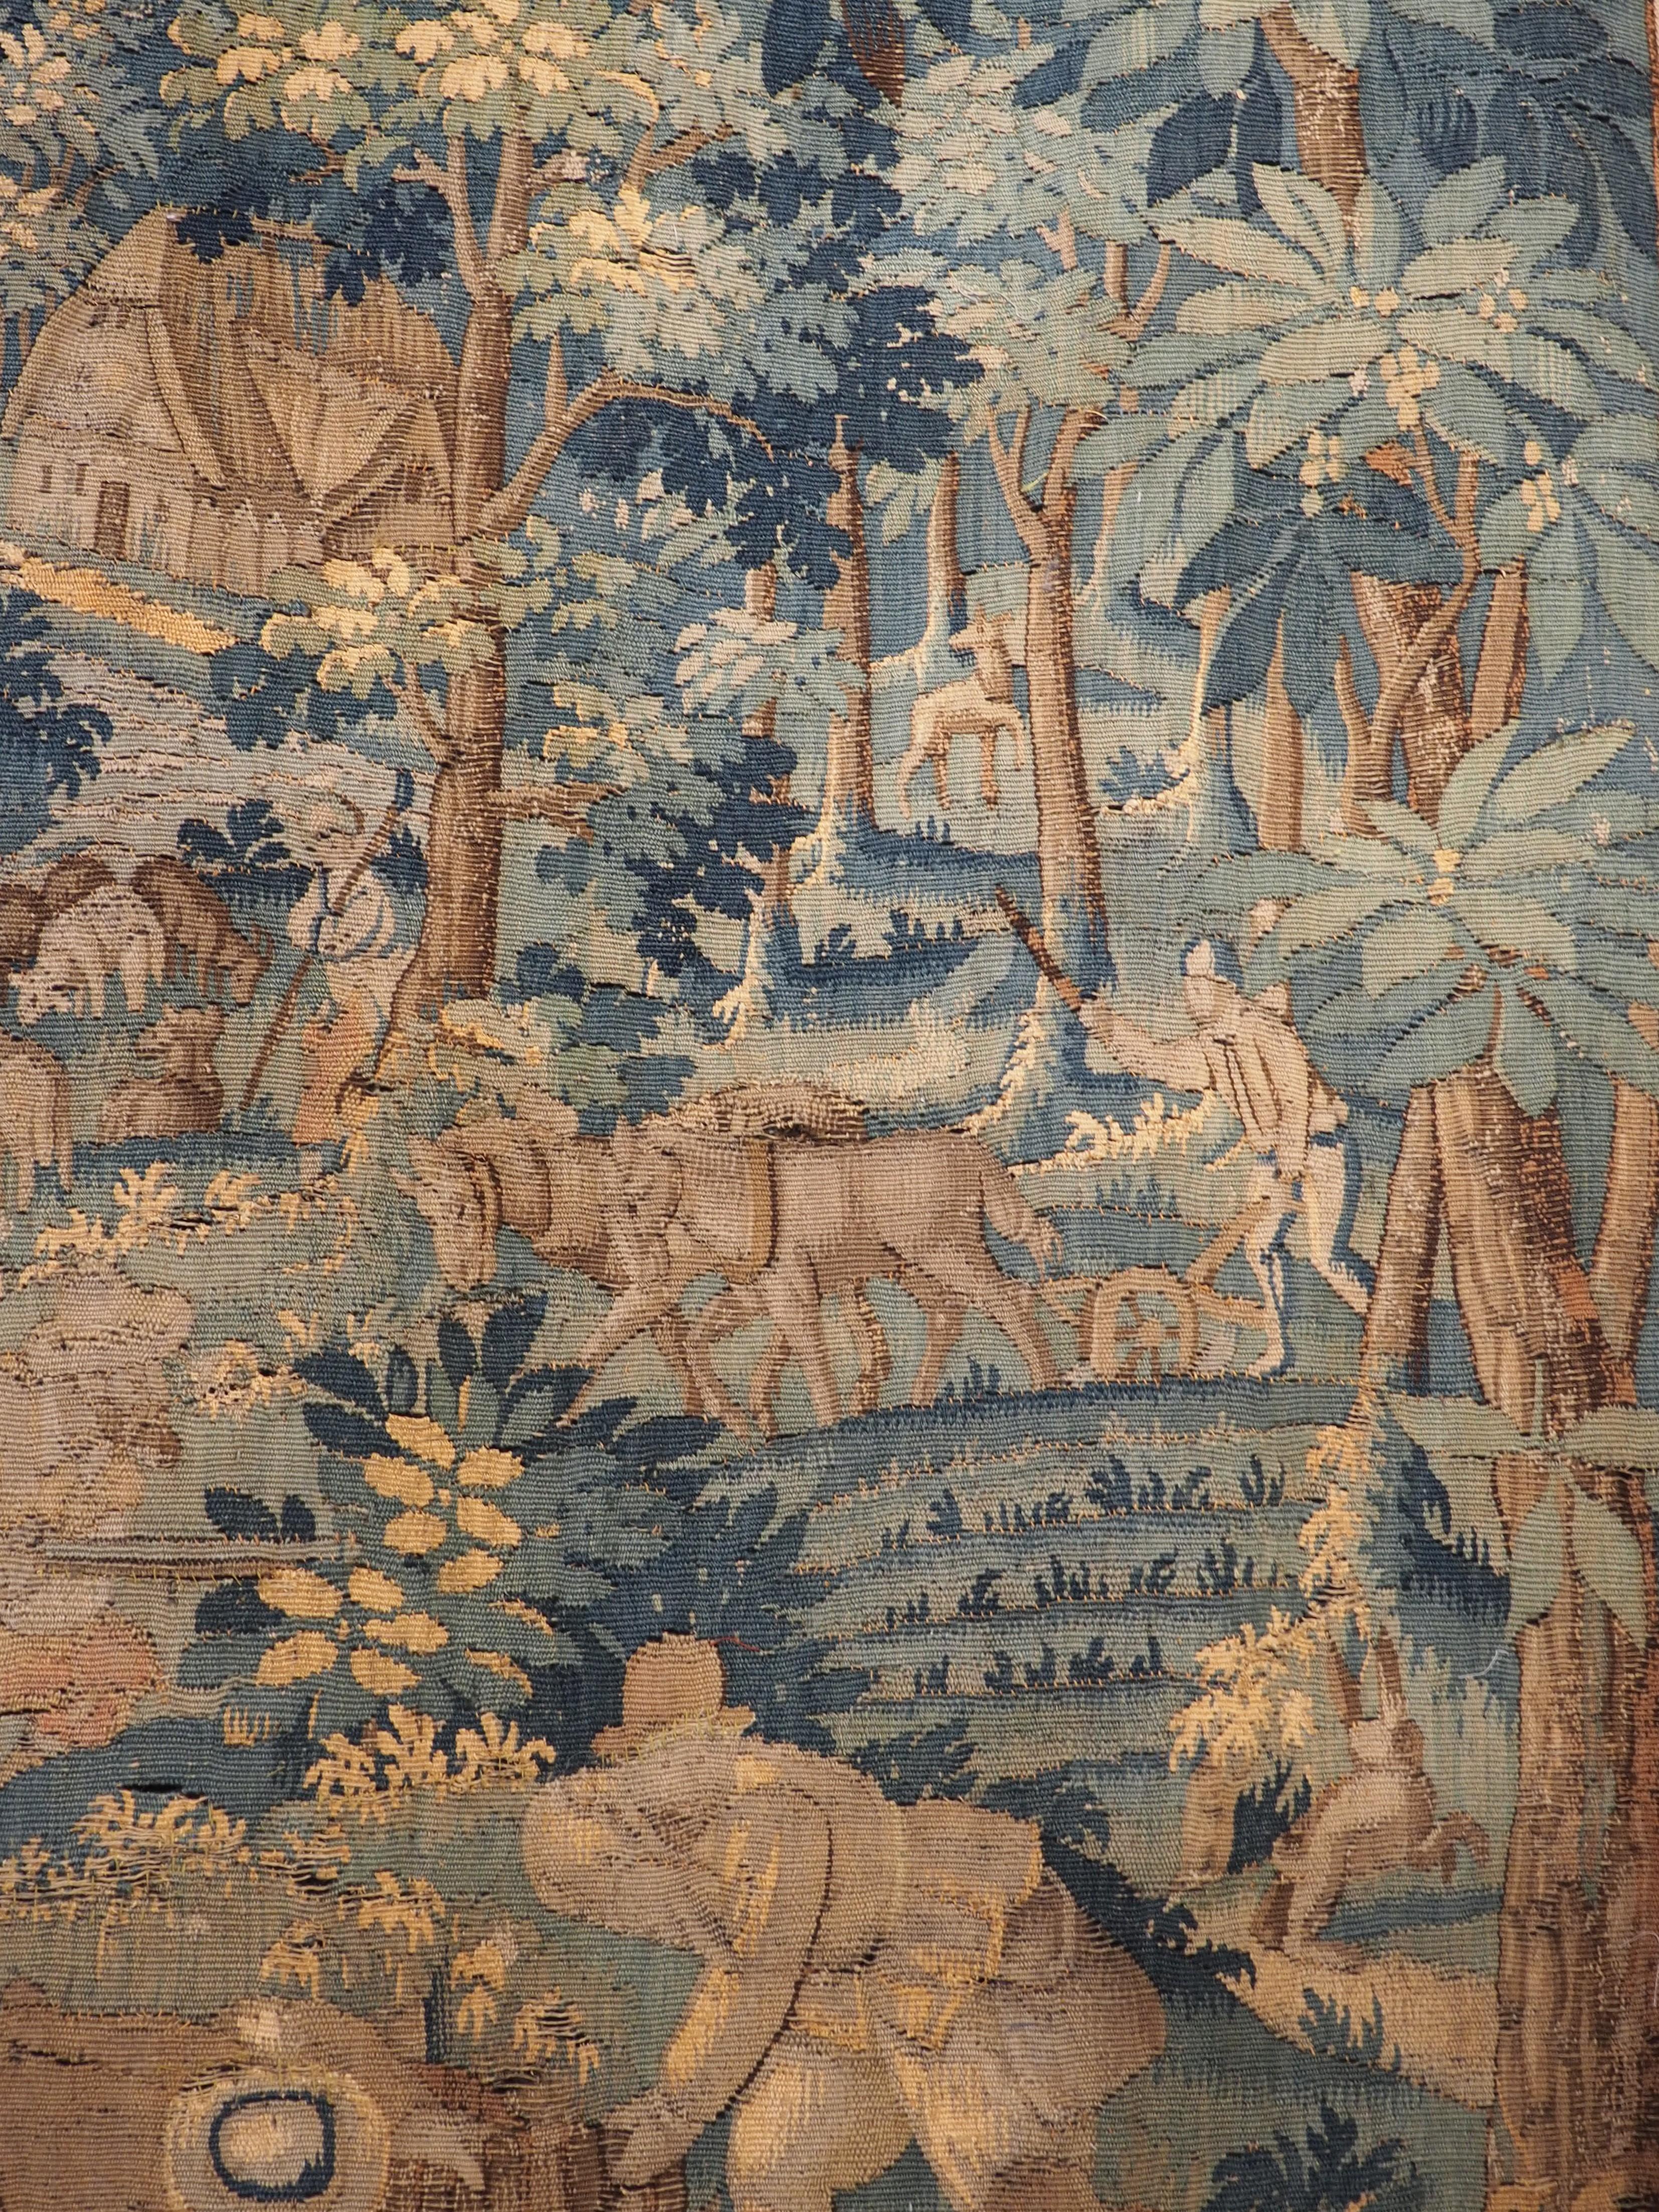 Textile 16th Century Verdure Landscape Tapestry from Flanders